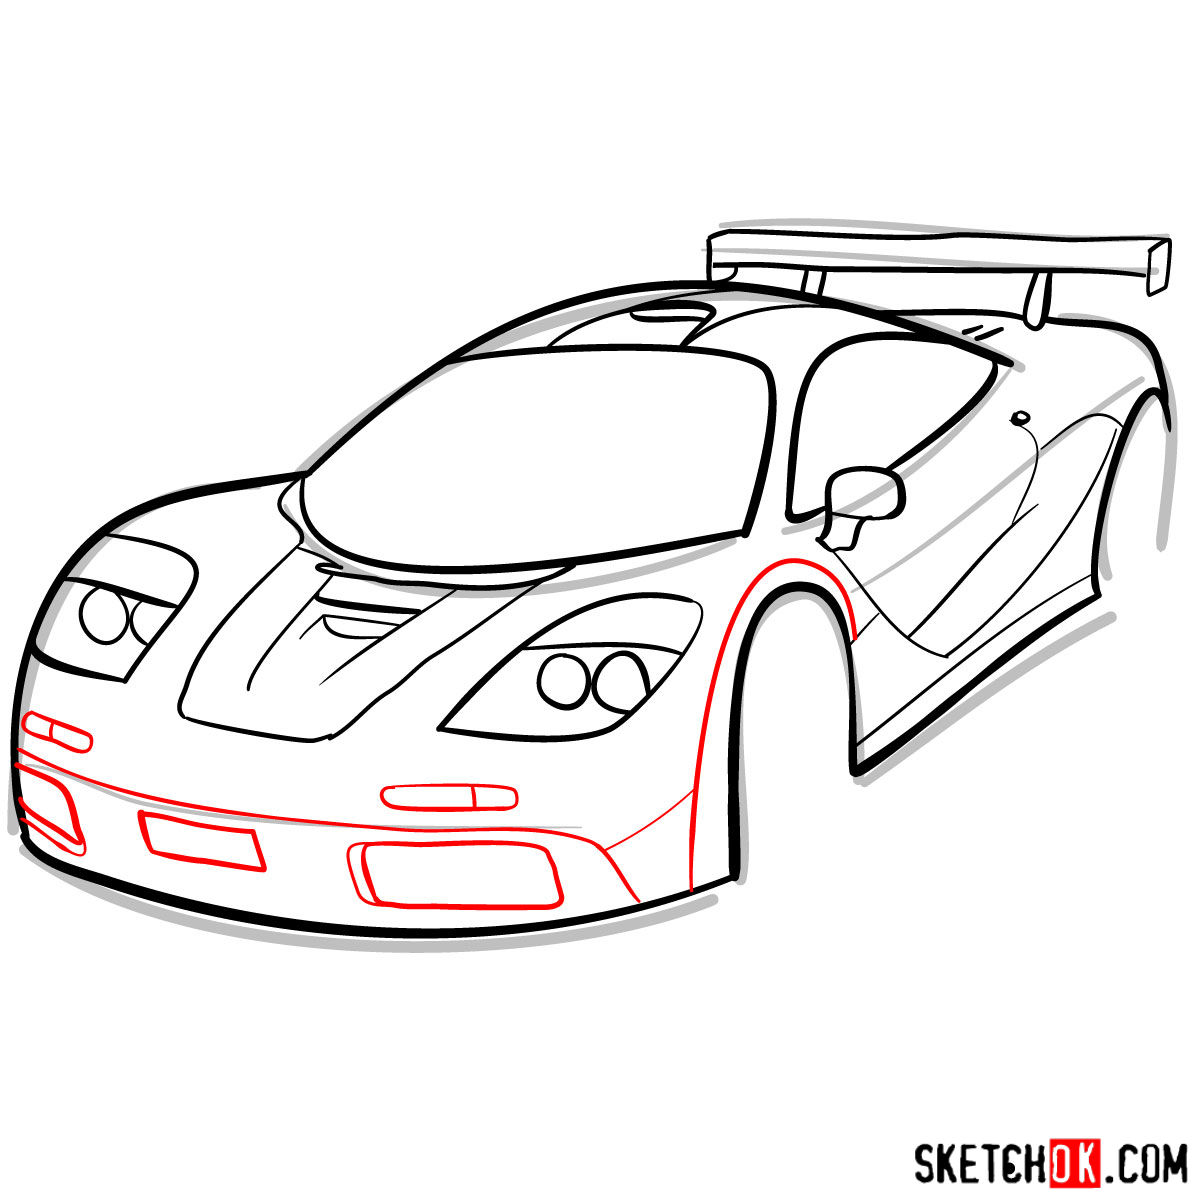 McLaren F1 - step by step drawing guide - step 09